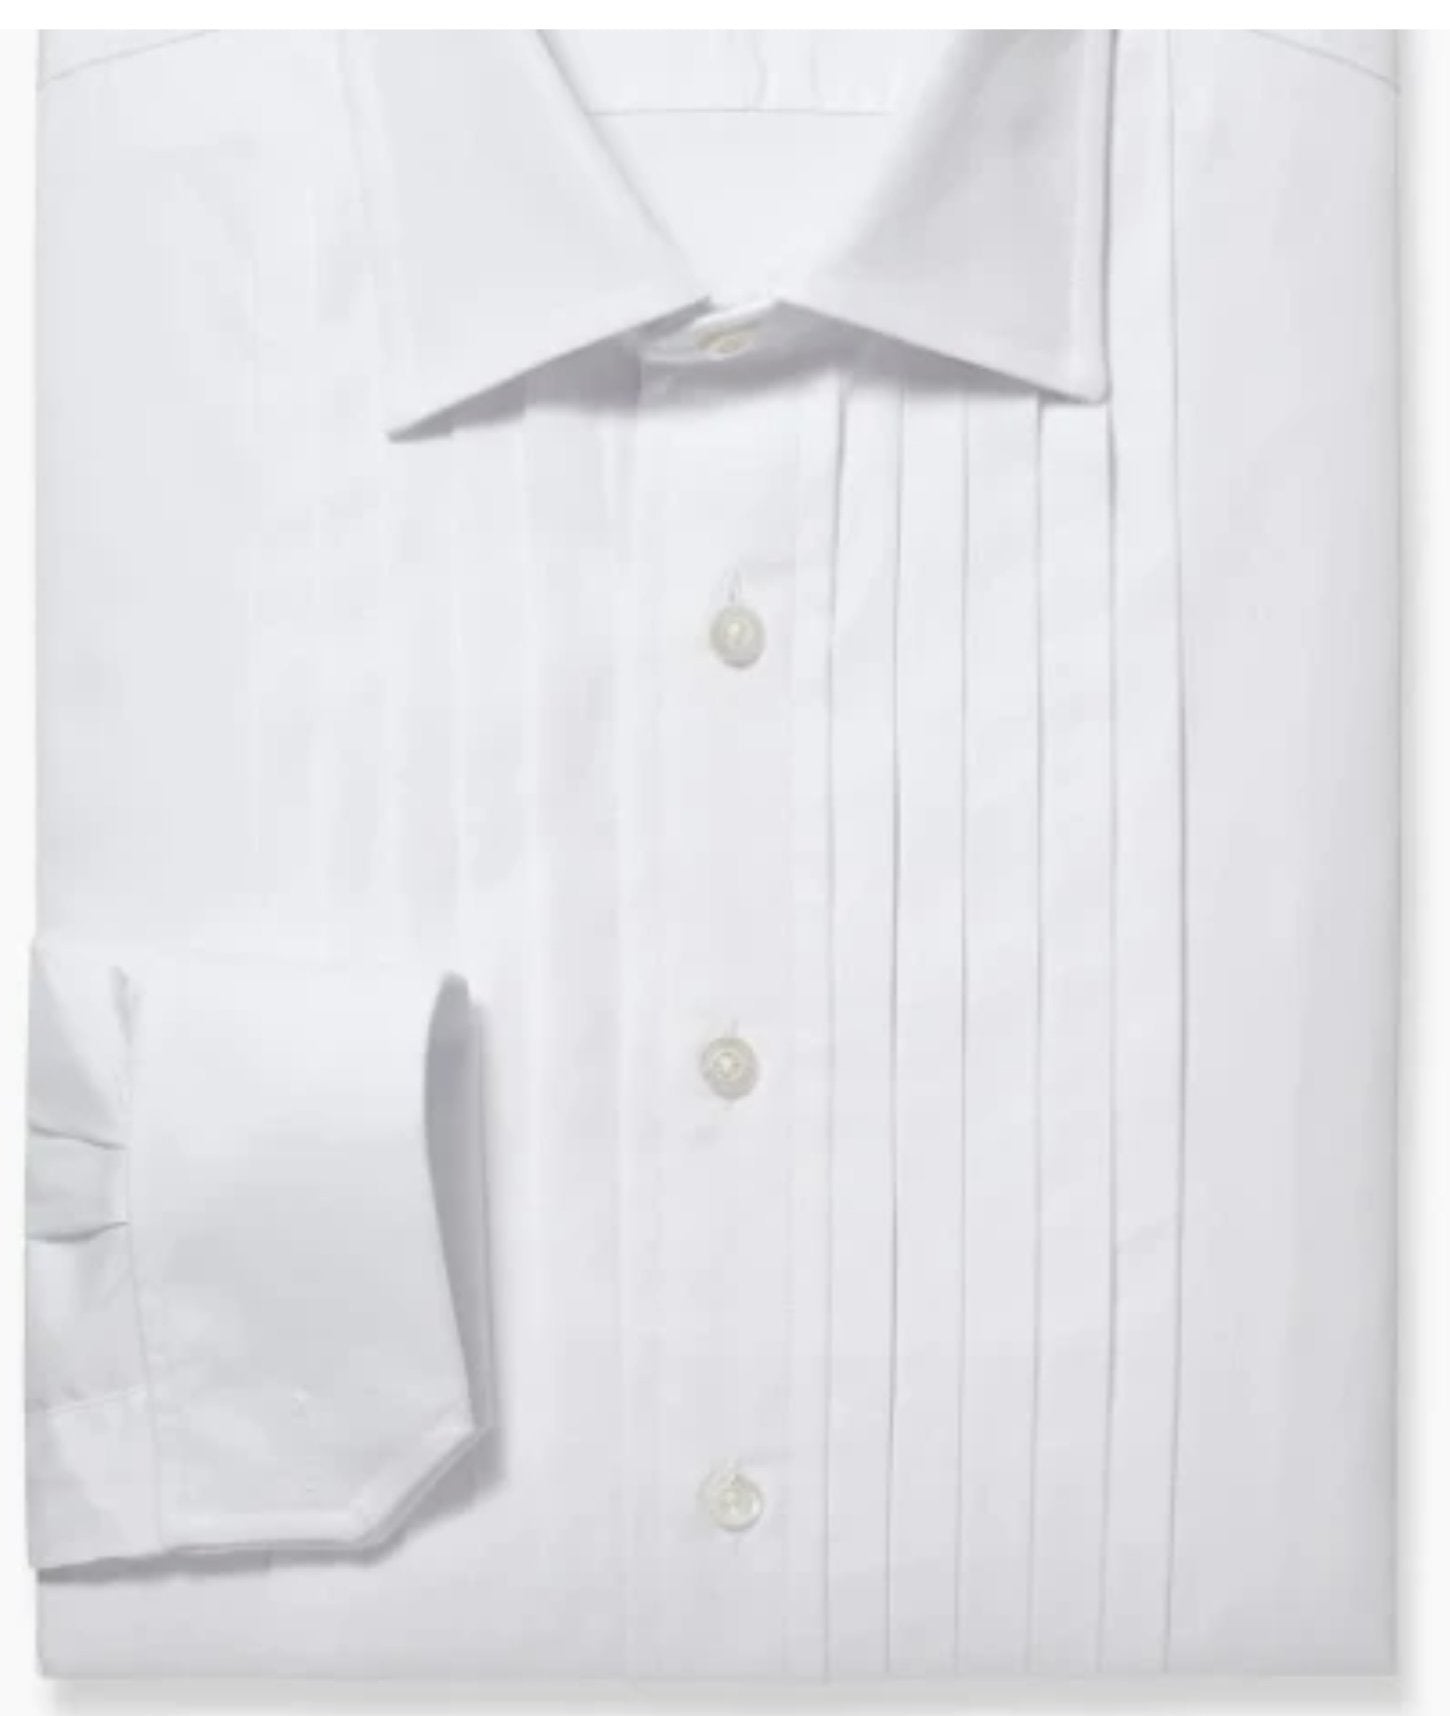 R P DESIGNS TUXEDO SHIRT / HAND PLEATED FRONT / WHITE COTTON